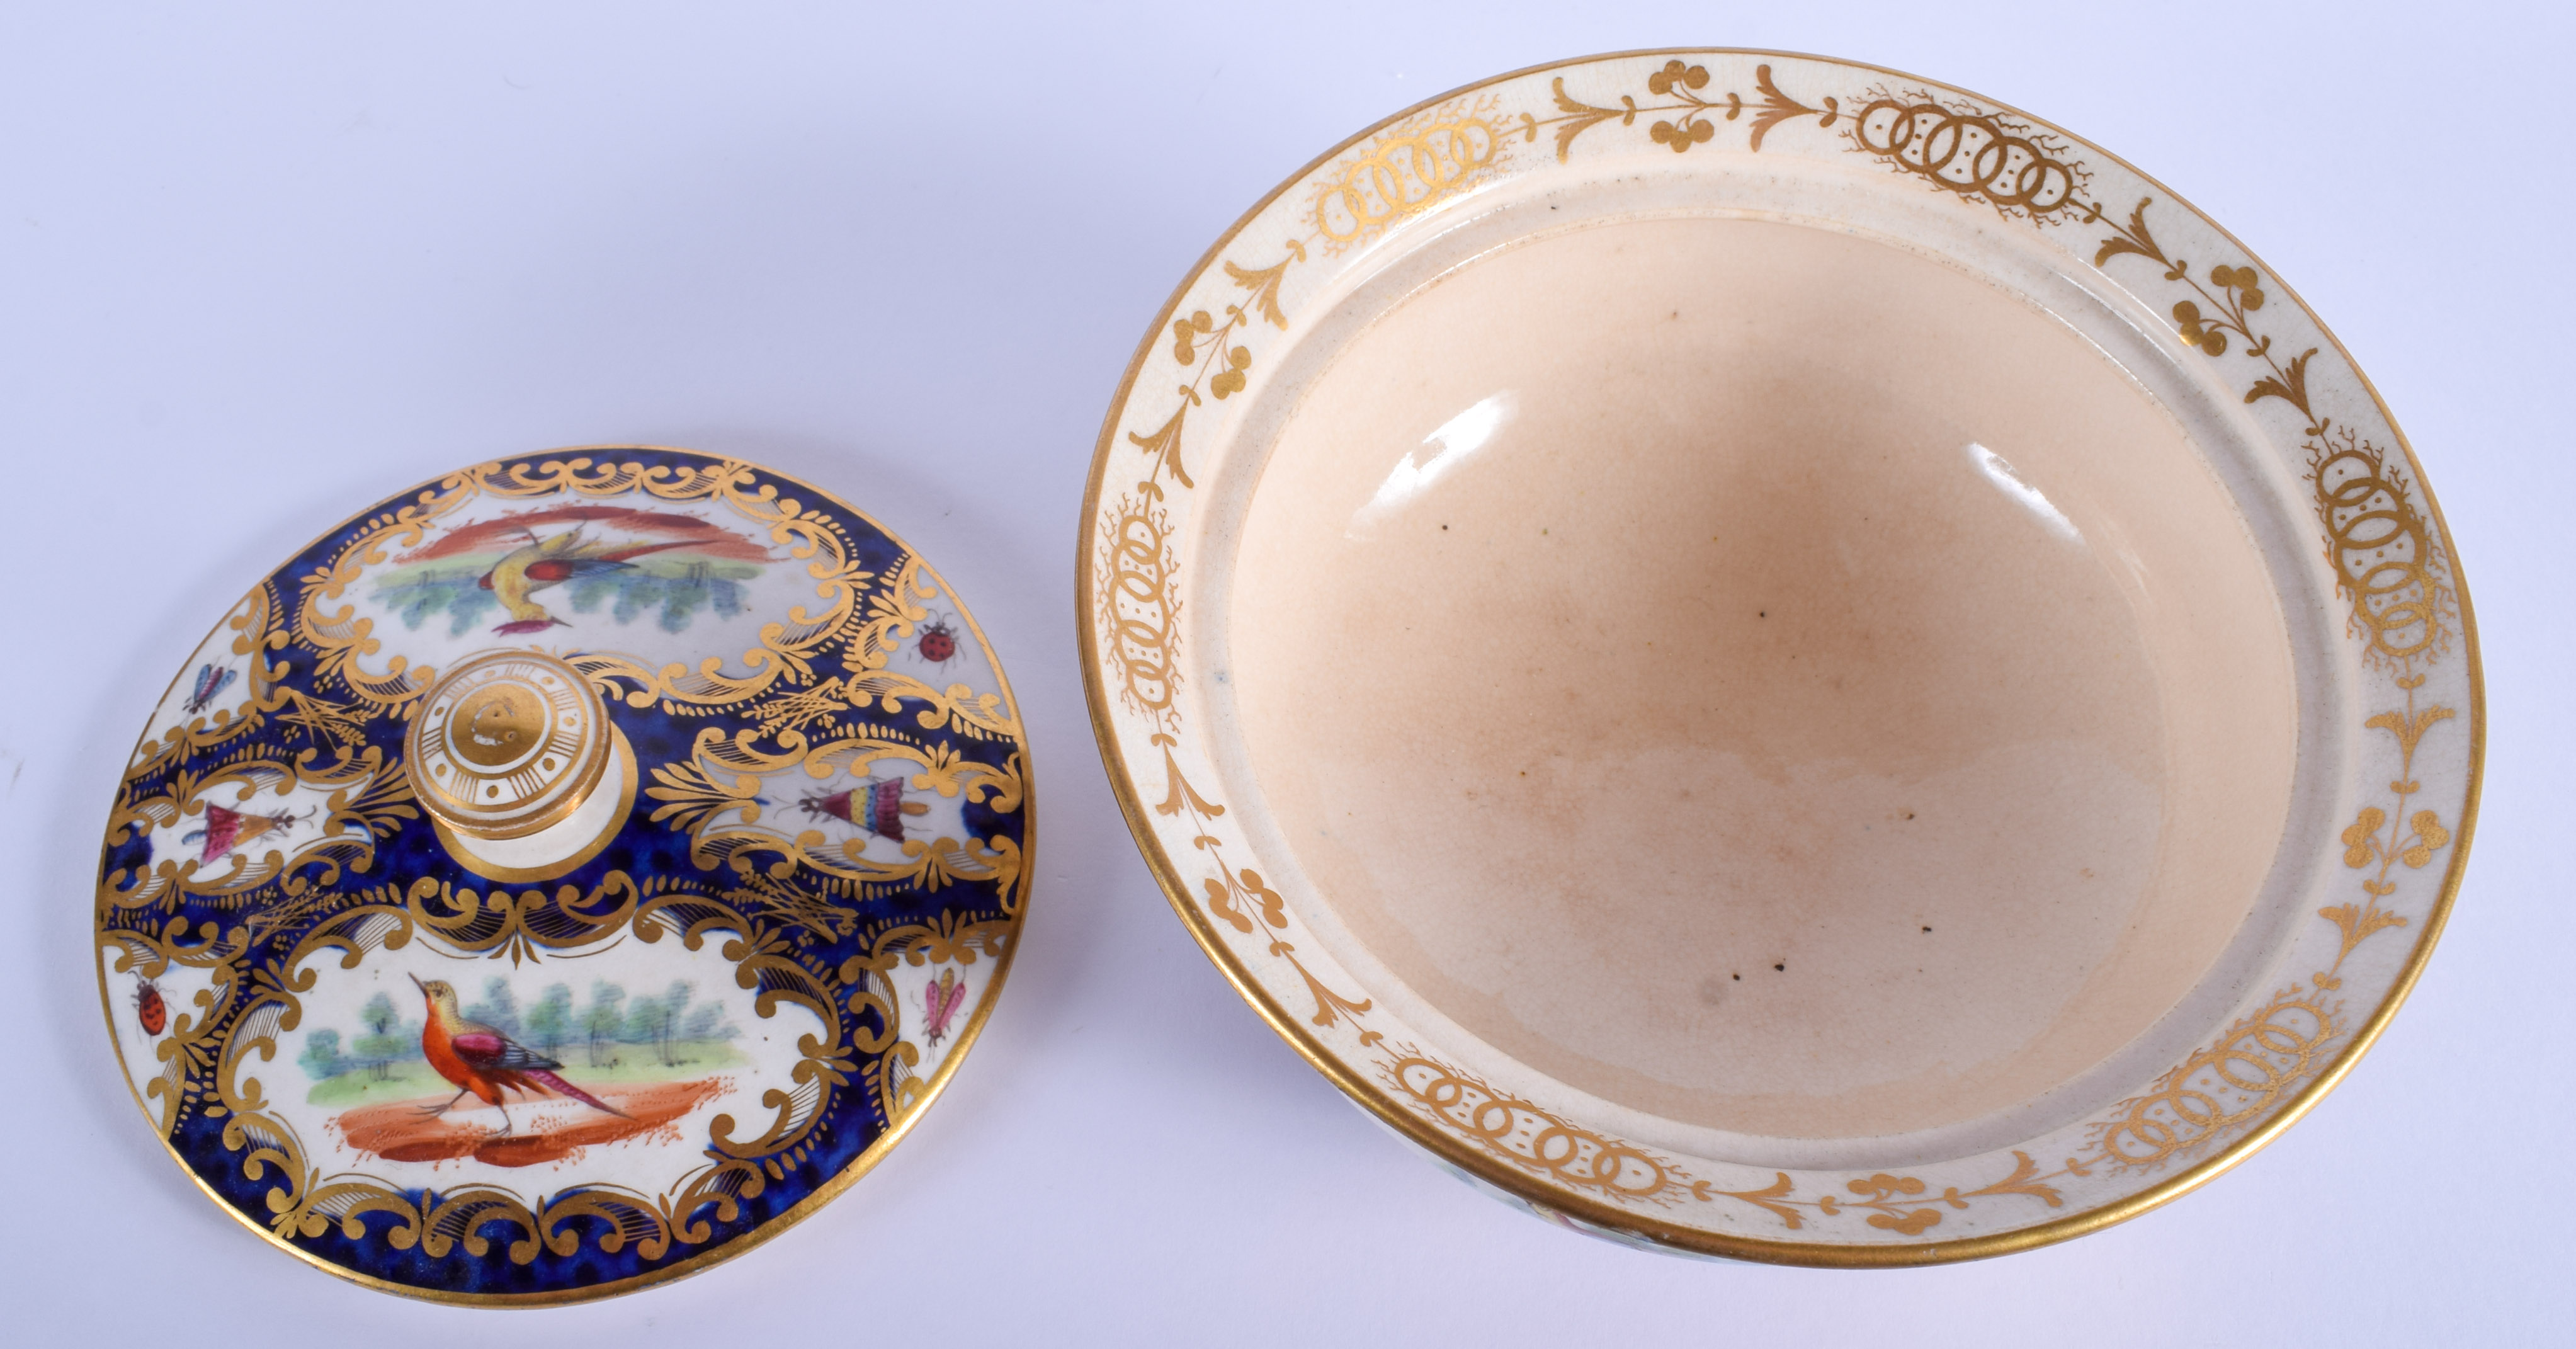 19th c. English porcelain sucrier and cover painted with exotic birds on a blue scale ground probabl - Image 3 of 4